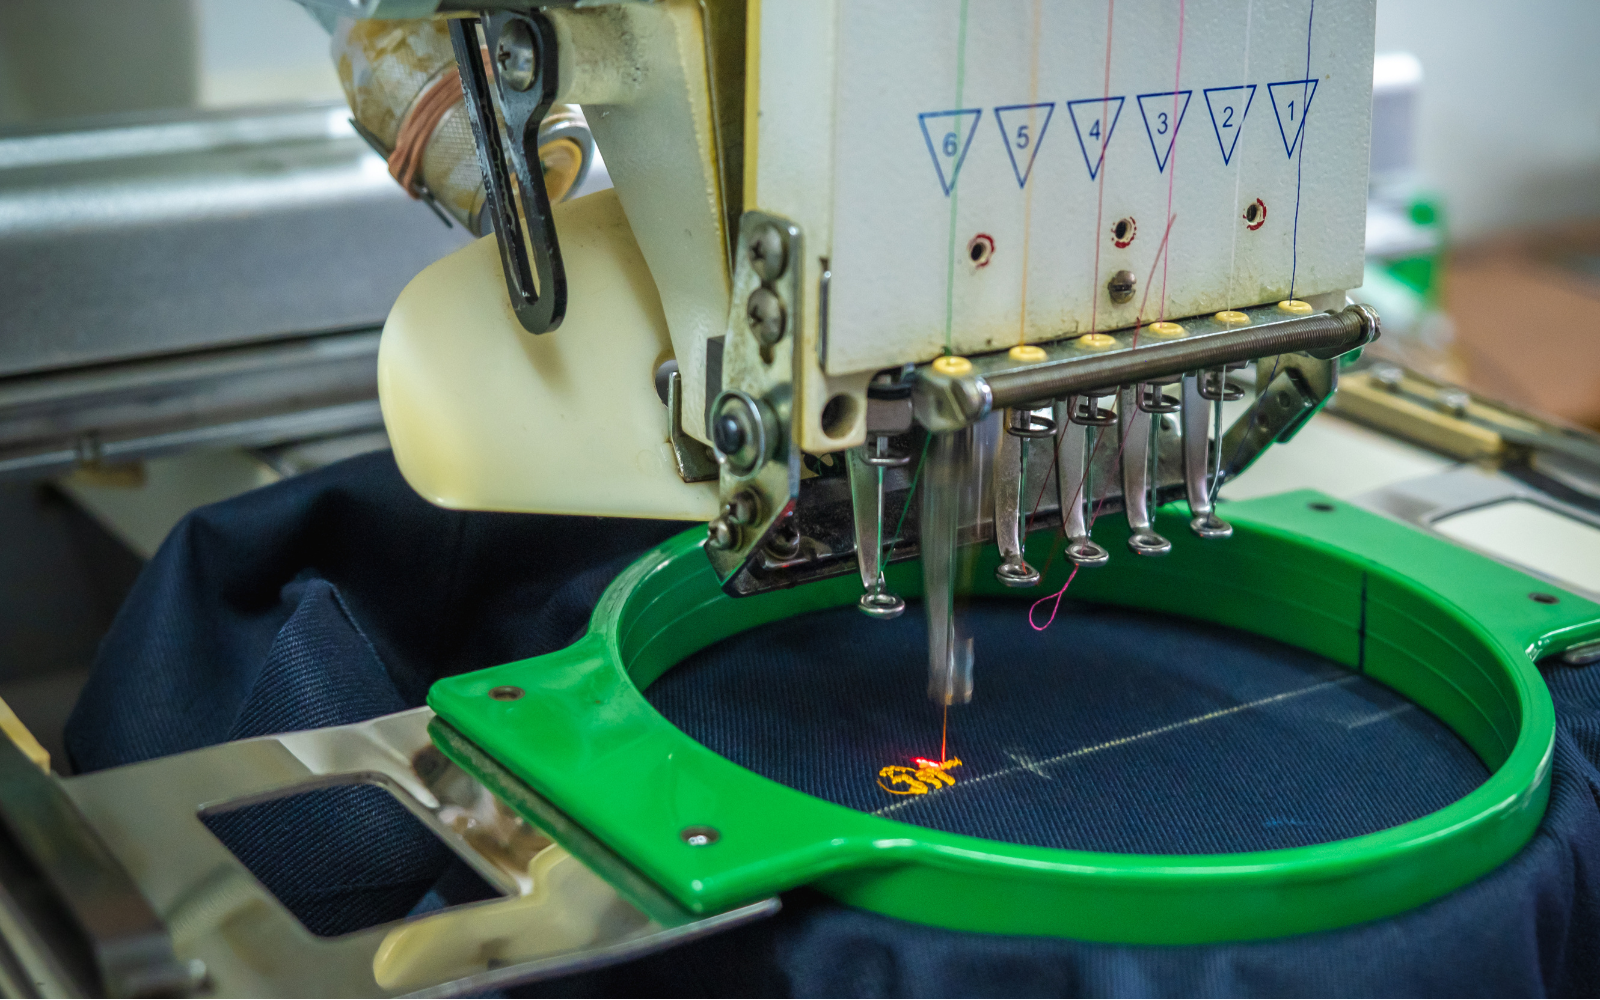 901 Embroidery Business Name Ideas to Stitch Up Your Profits in 2023